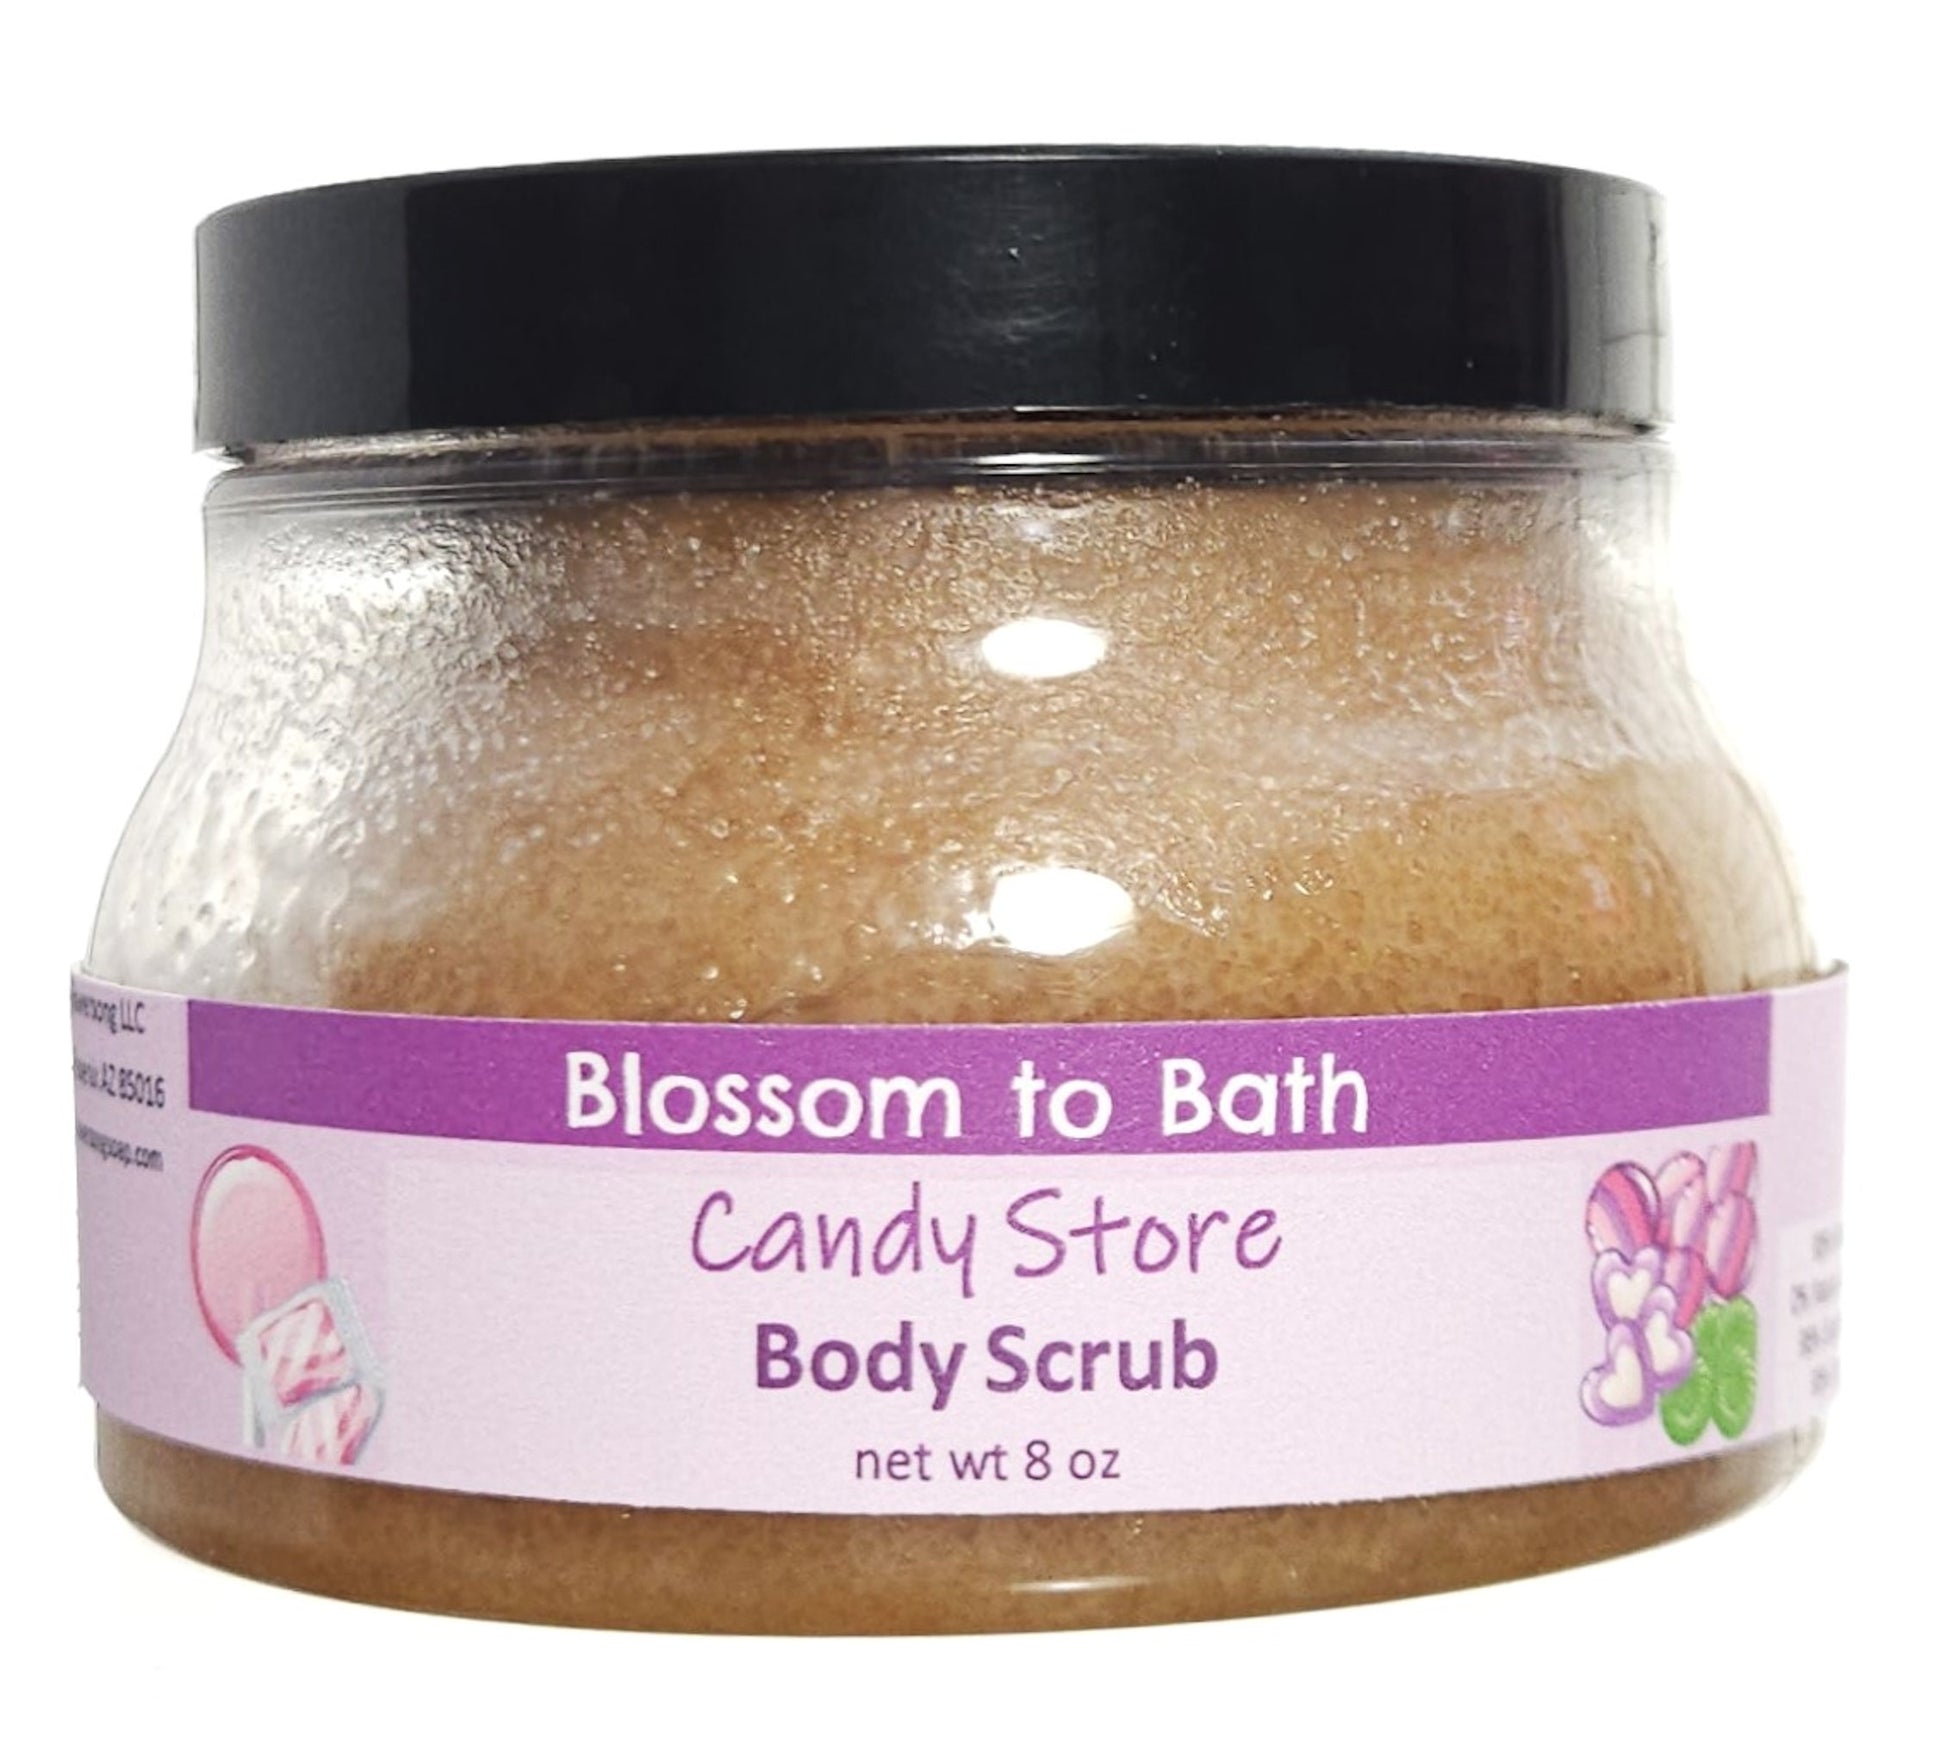 Buy Blossom to Bath Candy Store Body Scrub from Flowersong Soap Studio.  Large crystal turbinado sugar plus  rich oils conveniently exfoliate and moisturize in one step  A nostalgic fragrance has pops of sweet fruity bubbles on a bed of spun sugar and vanilla bean.